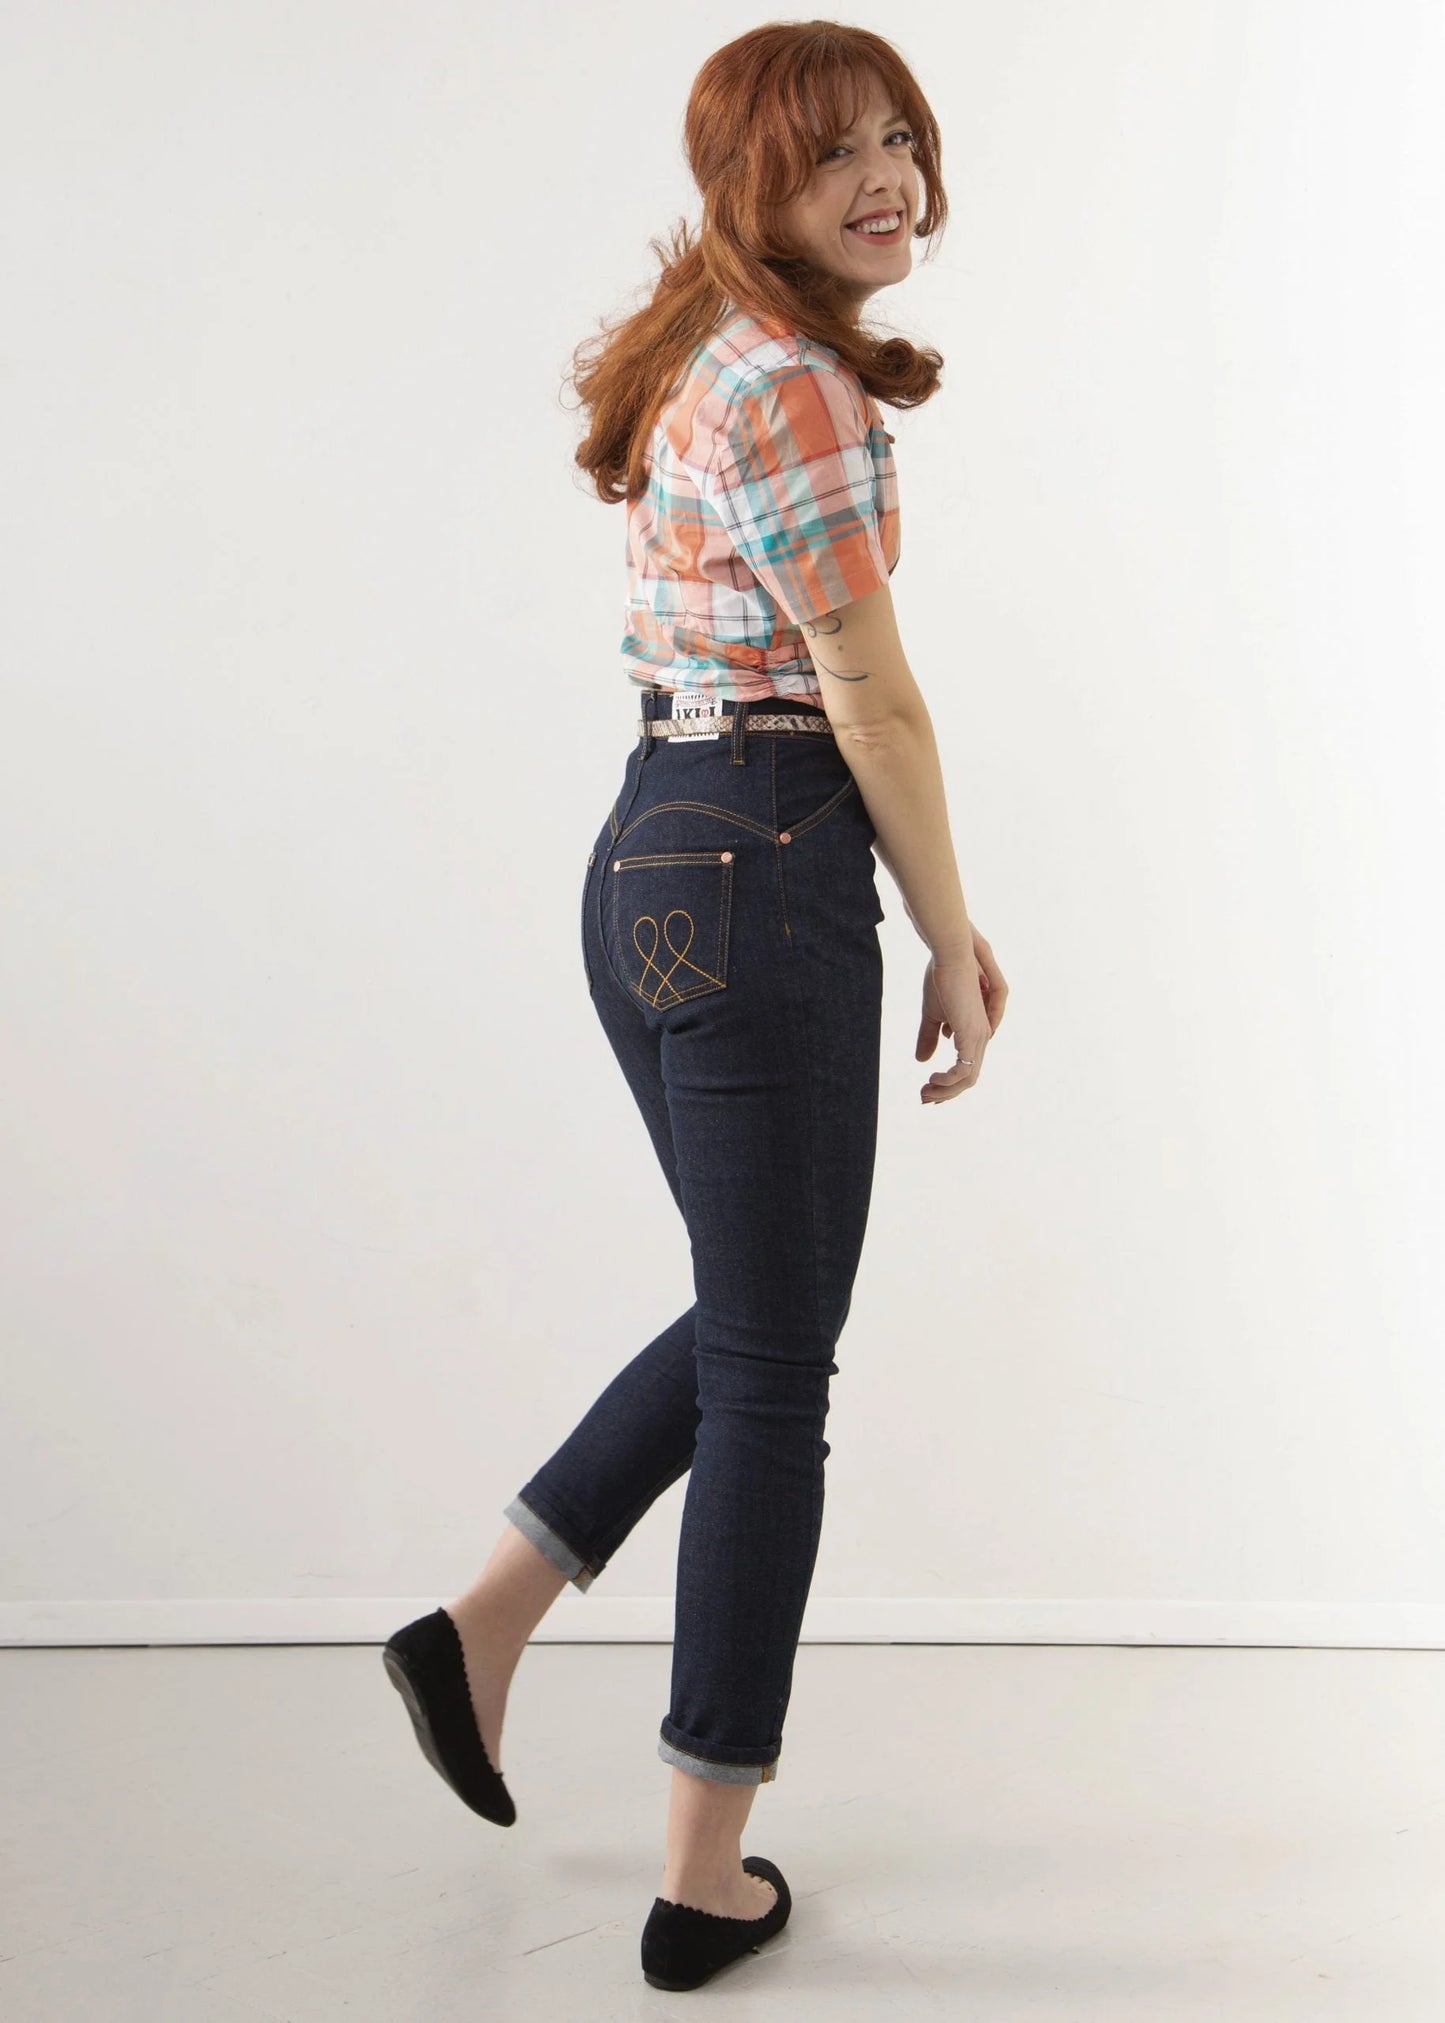 Polly Petite Jeans in Black by Lady K Loves